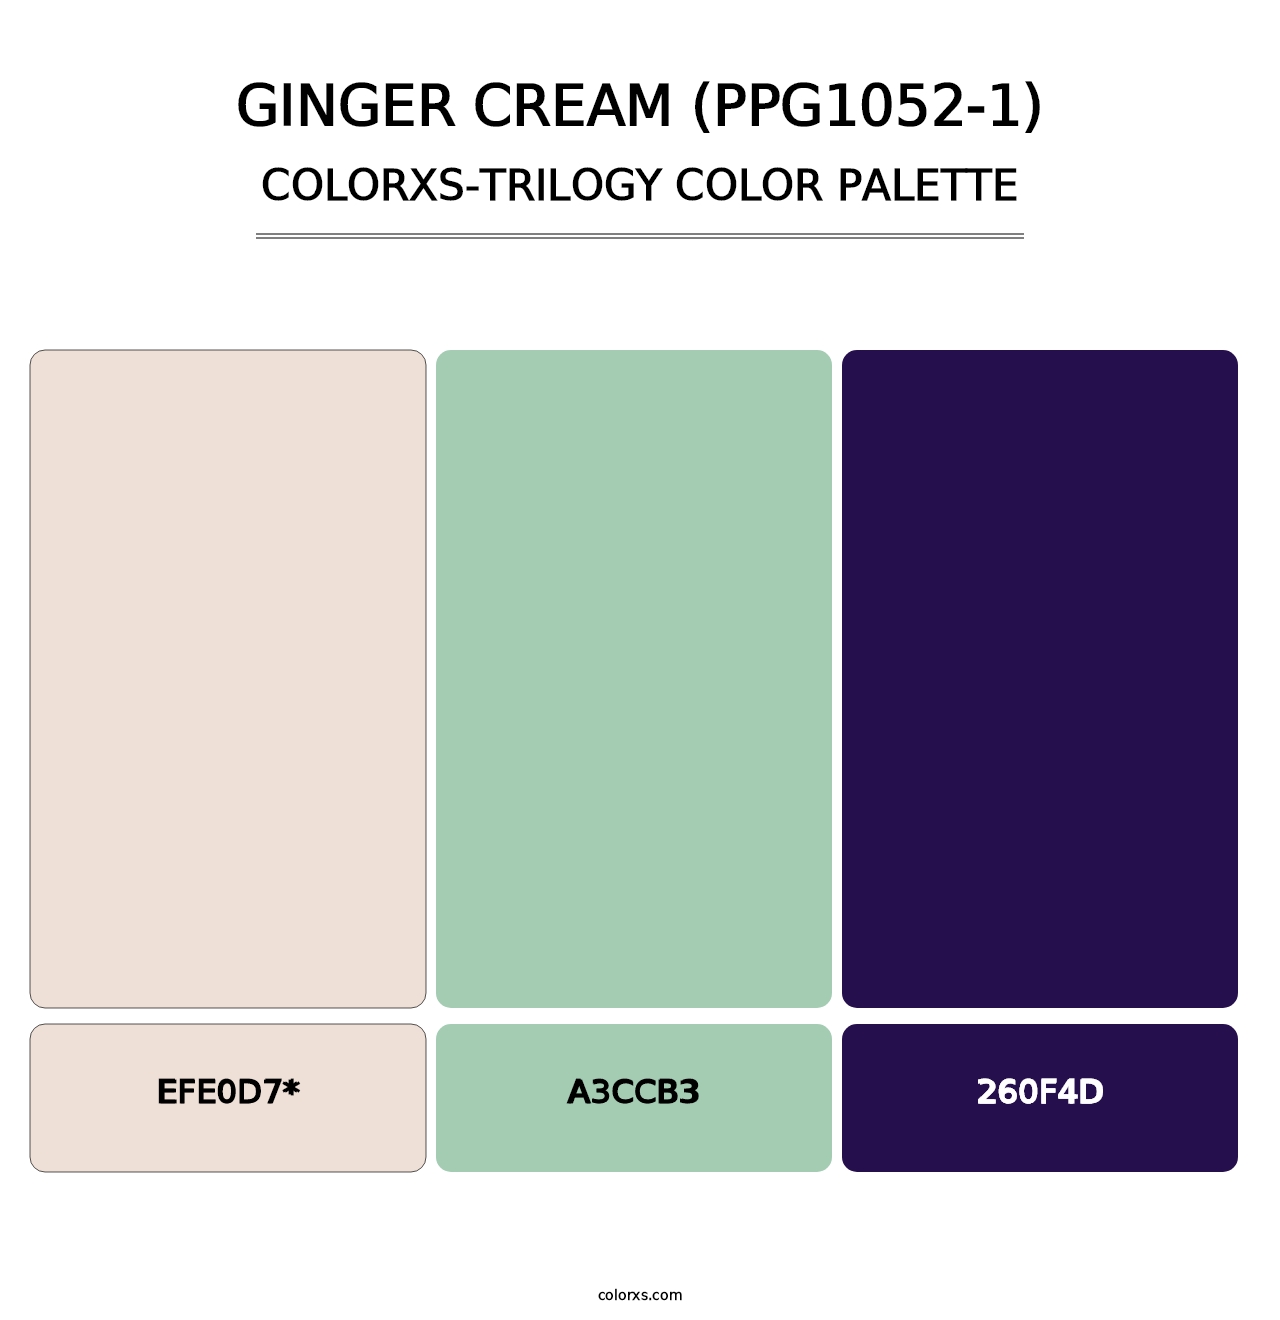 Ginger Cream (PPG1052-1) - Colorxs Trilogy Palette